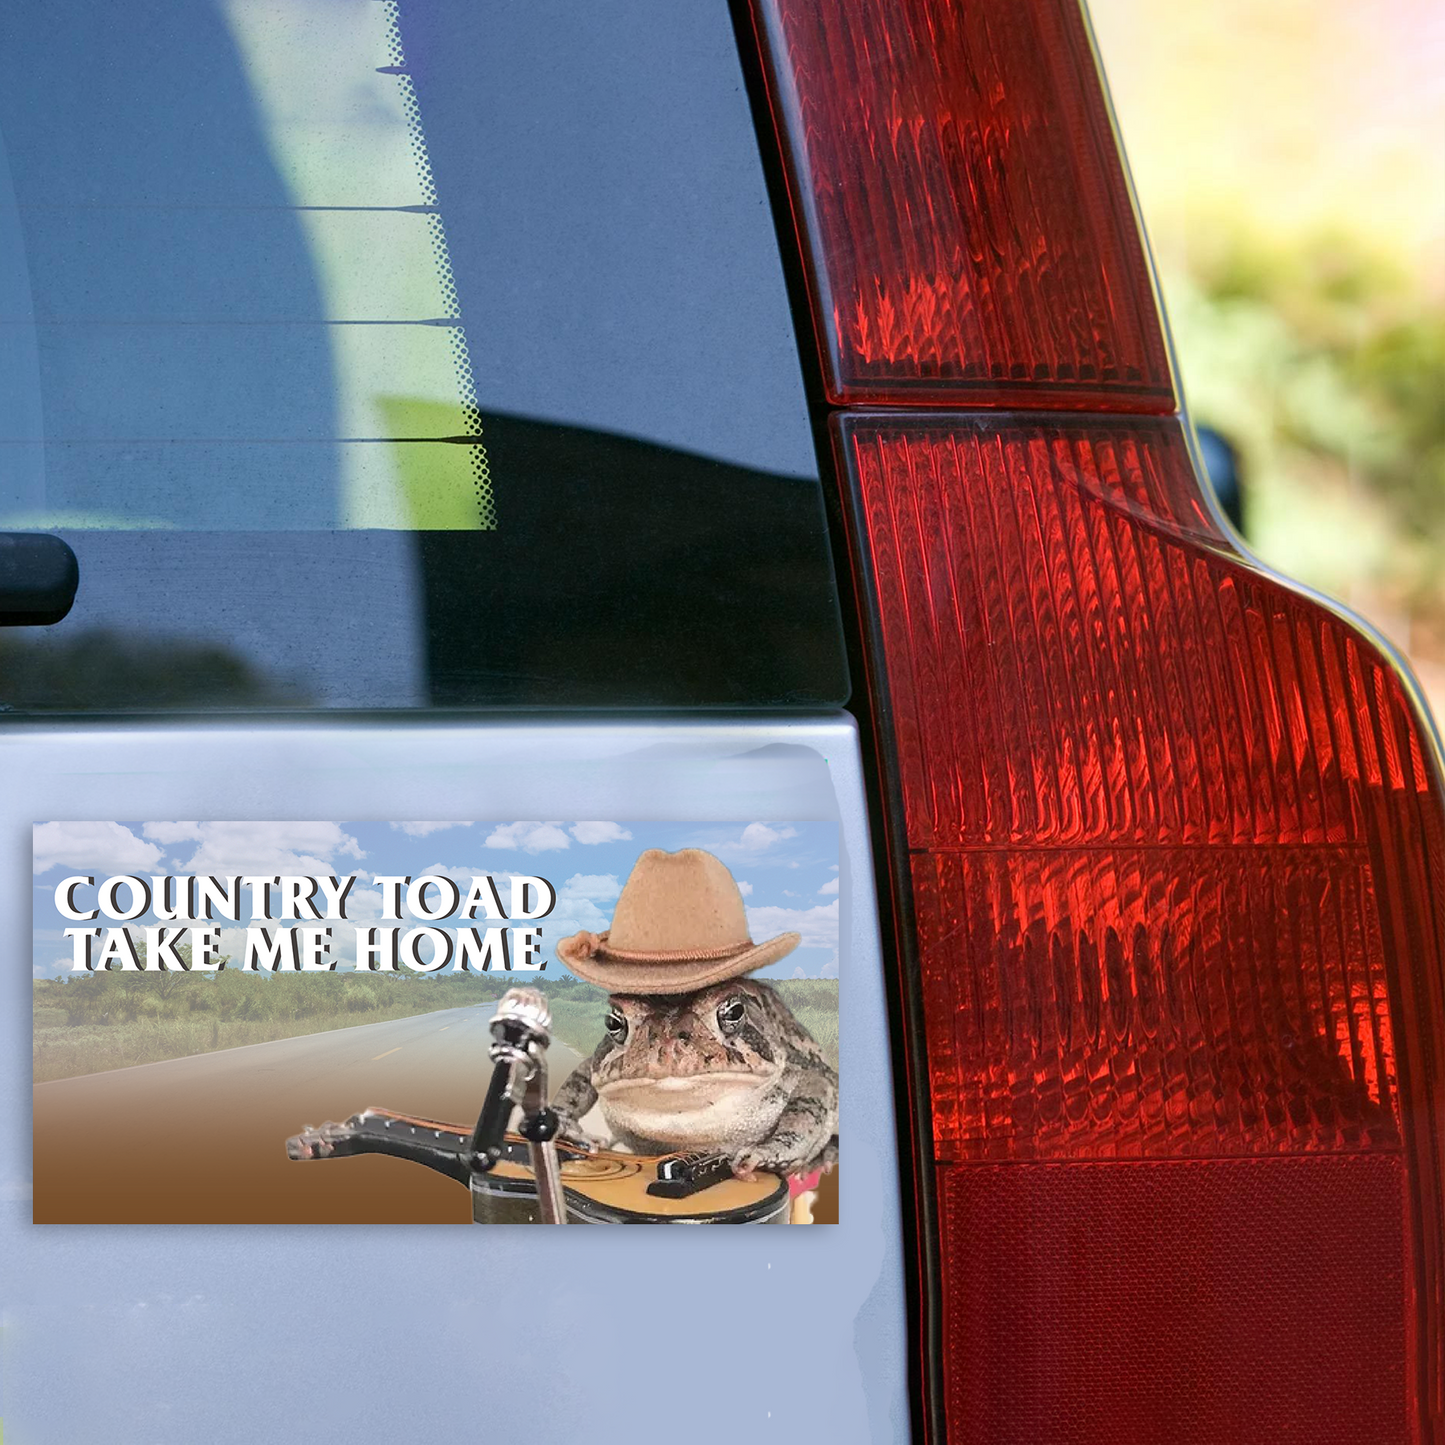 Country Toad, Take me Home Bumper Sticker